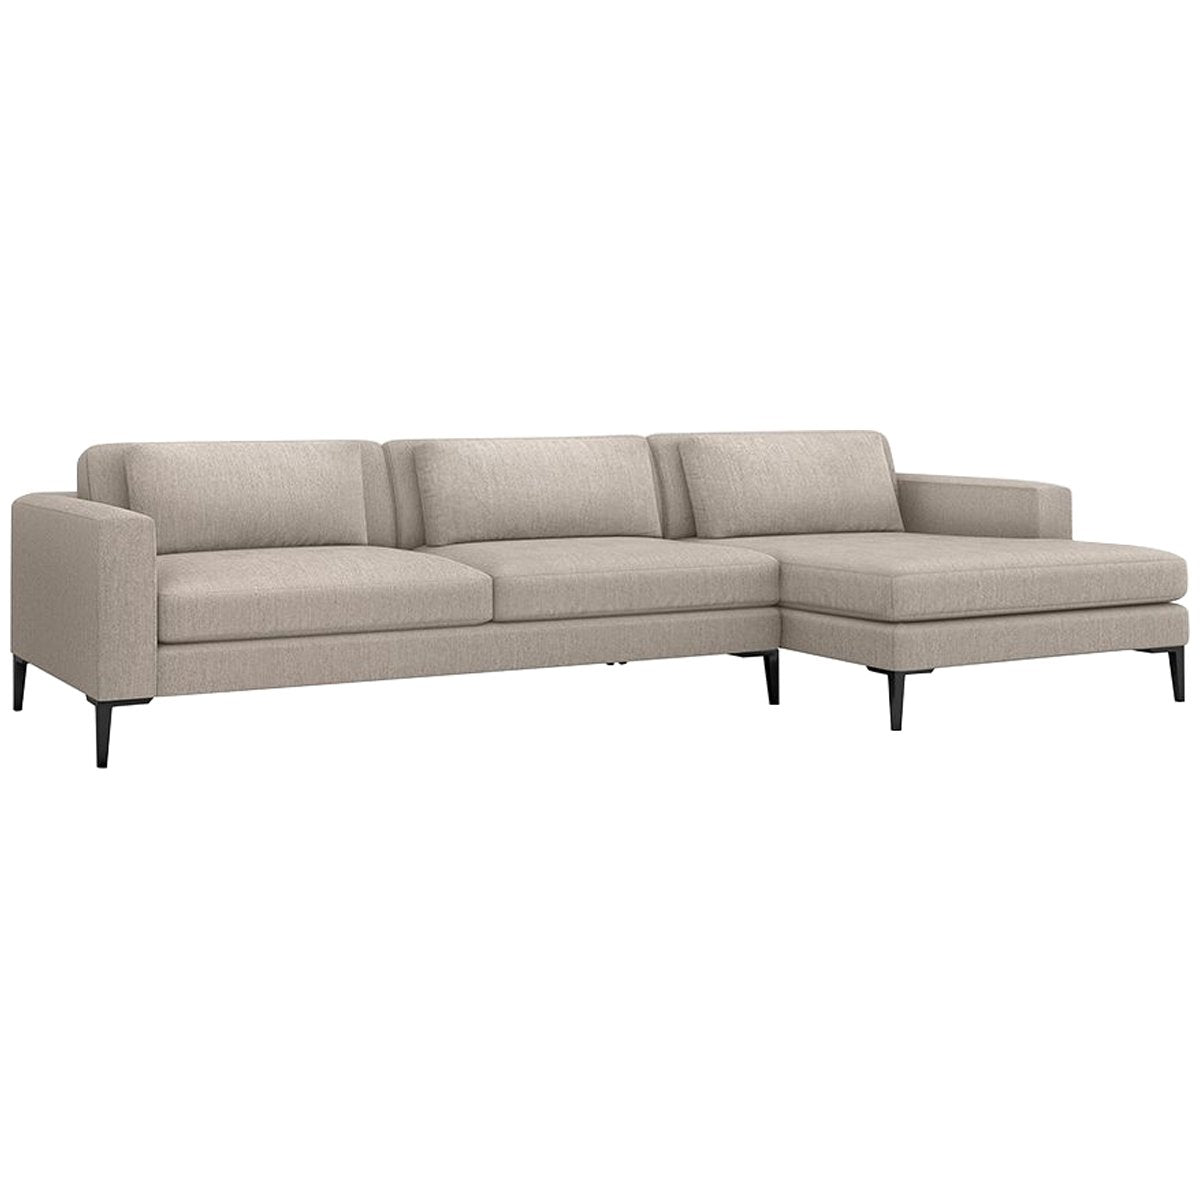 Interlude Home Izzy Luxe Chenille Chaise 2-Piece Sectional